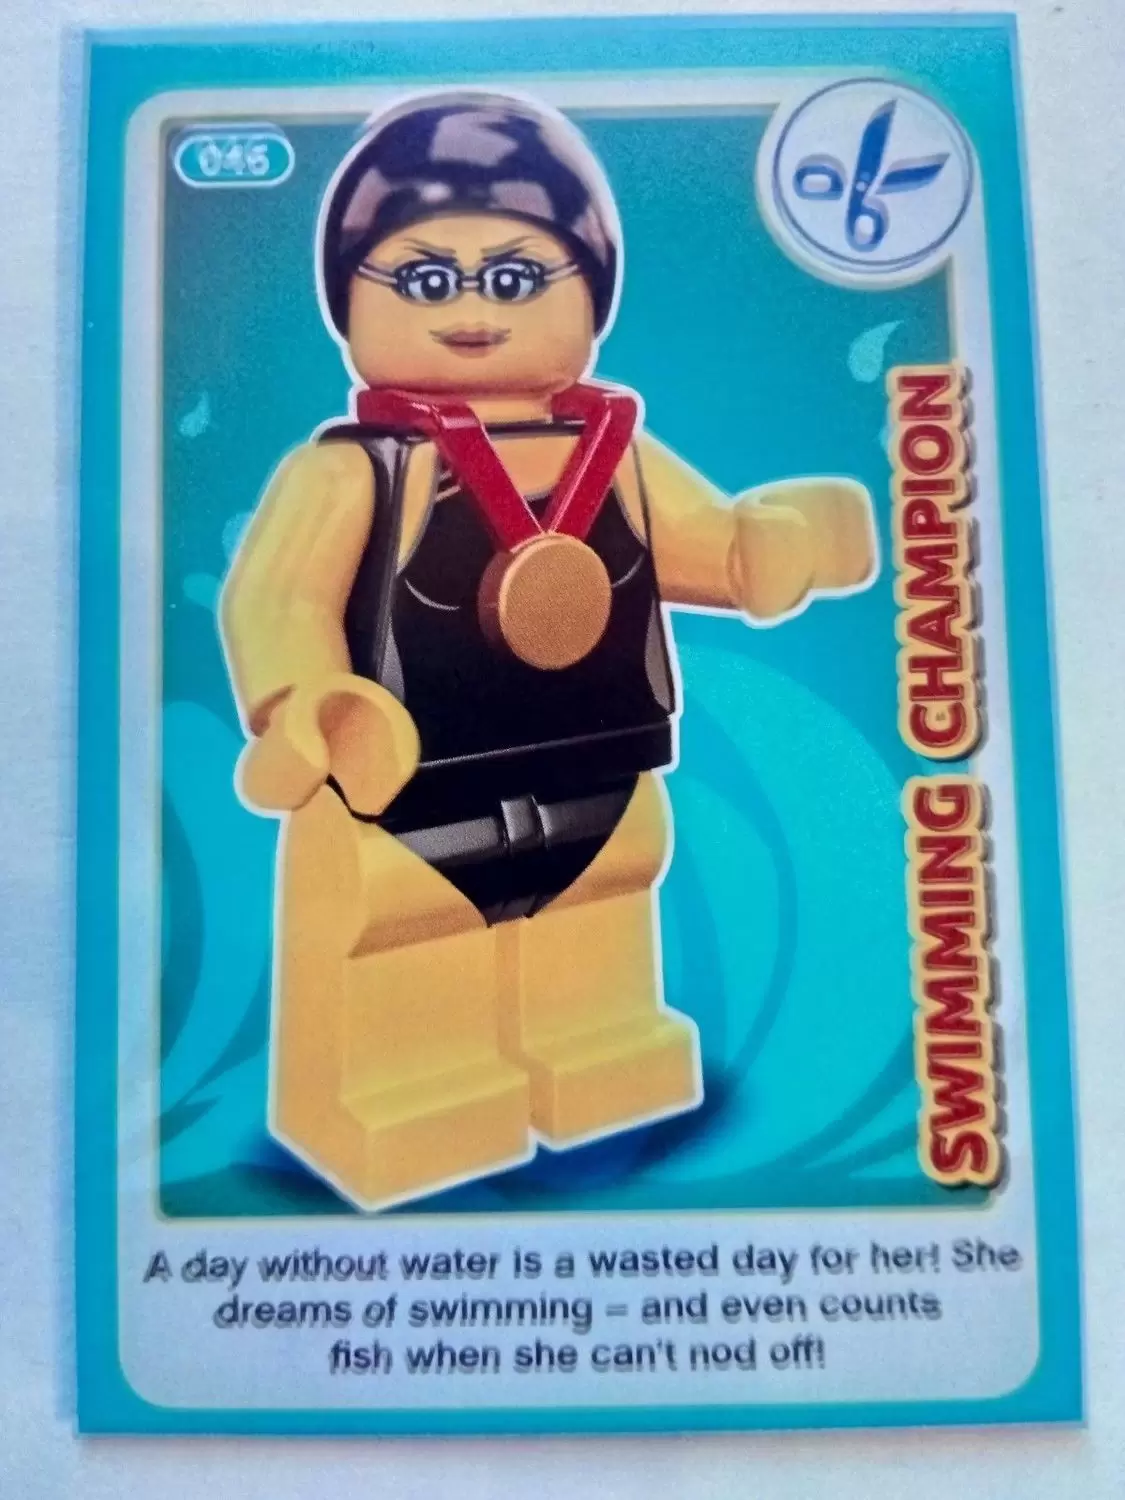 Sainsburys Lego Incredible Inventions 2018 - Swimming Champion